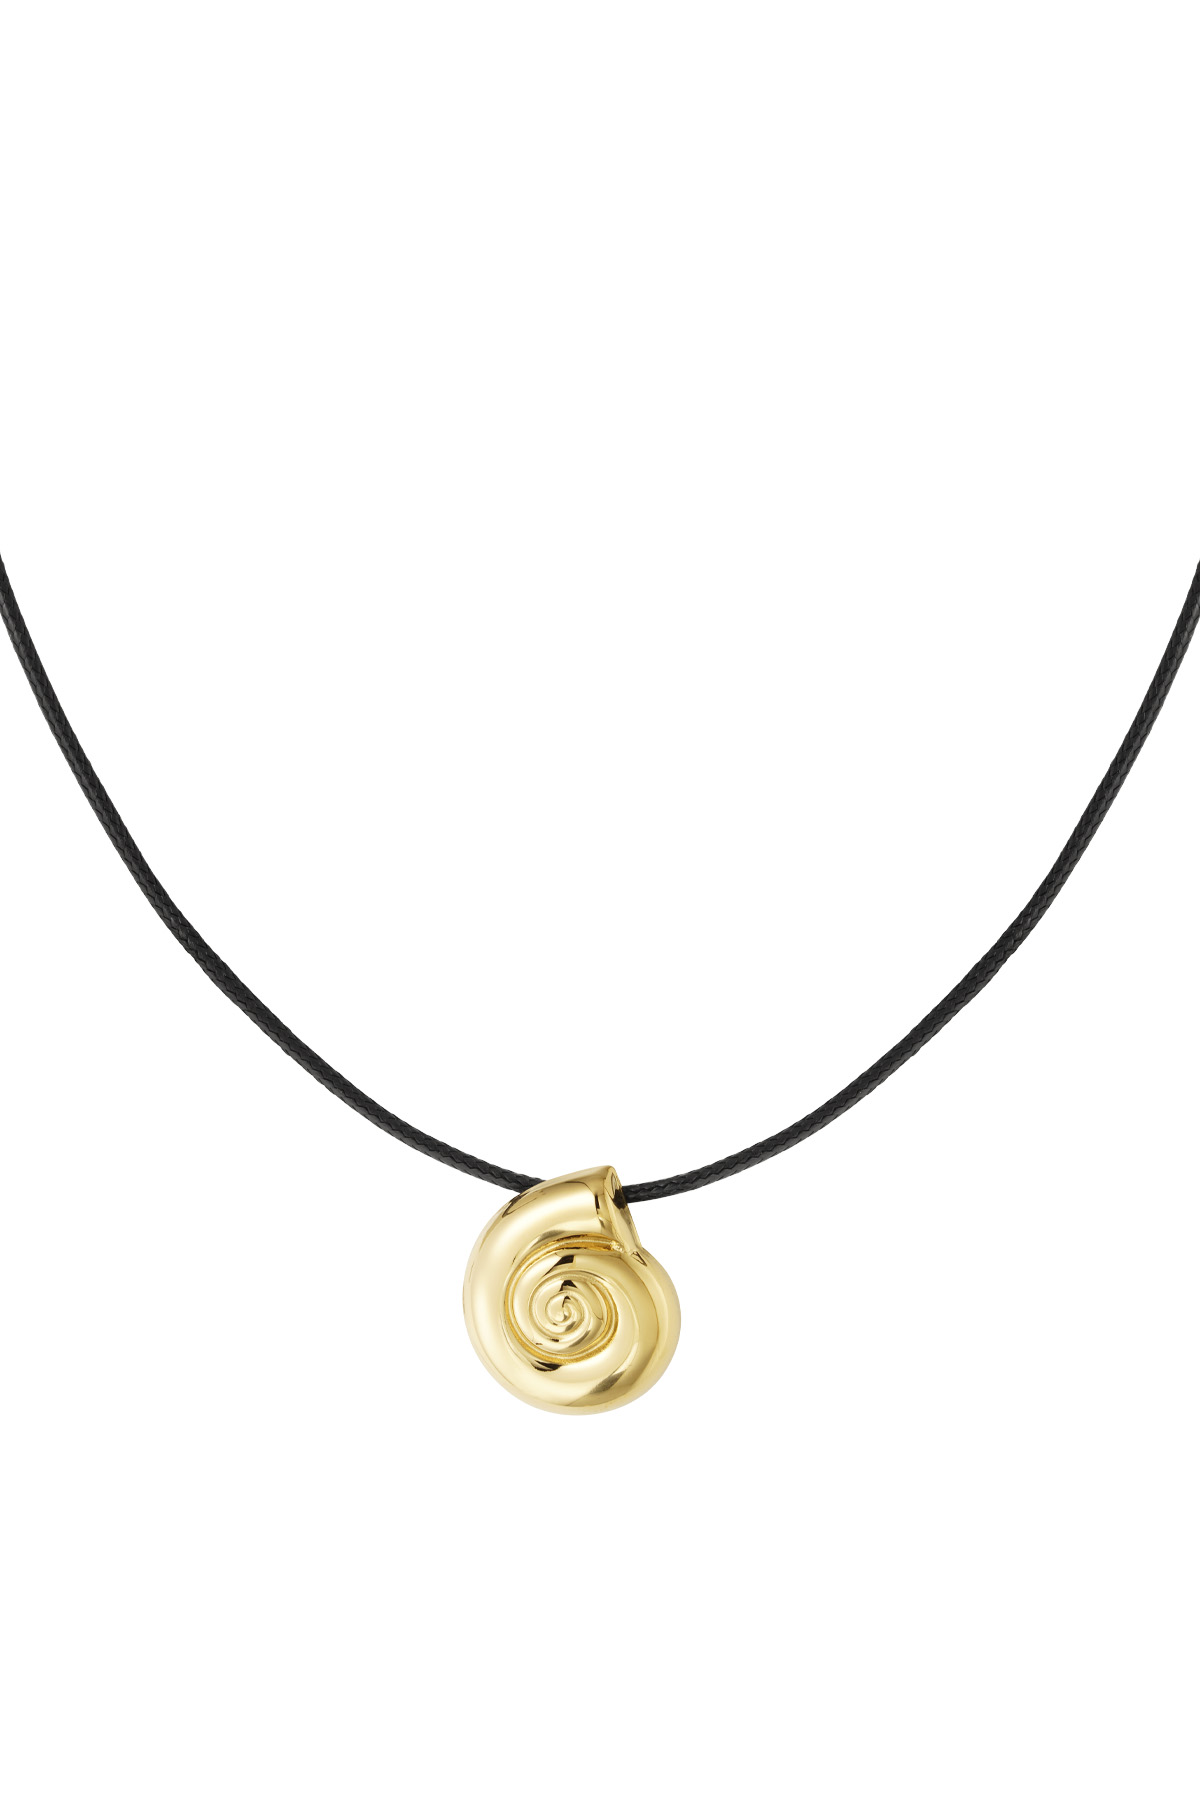 Shell vibe necklace - gold 